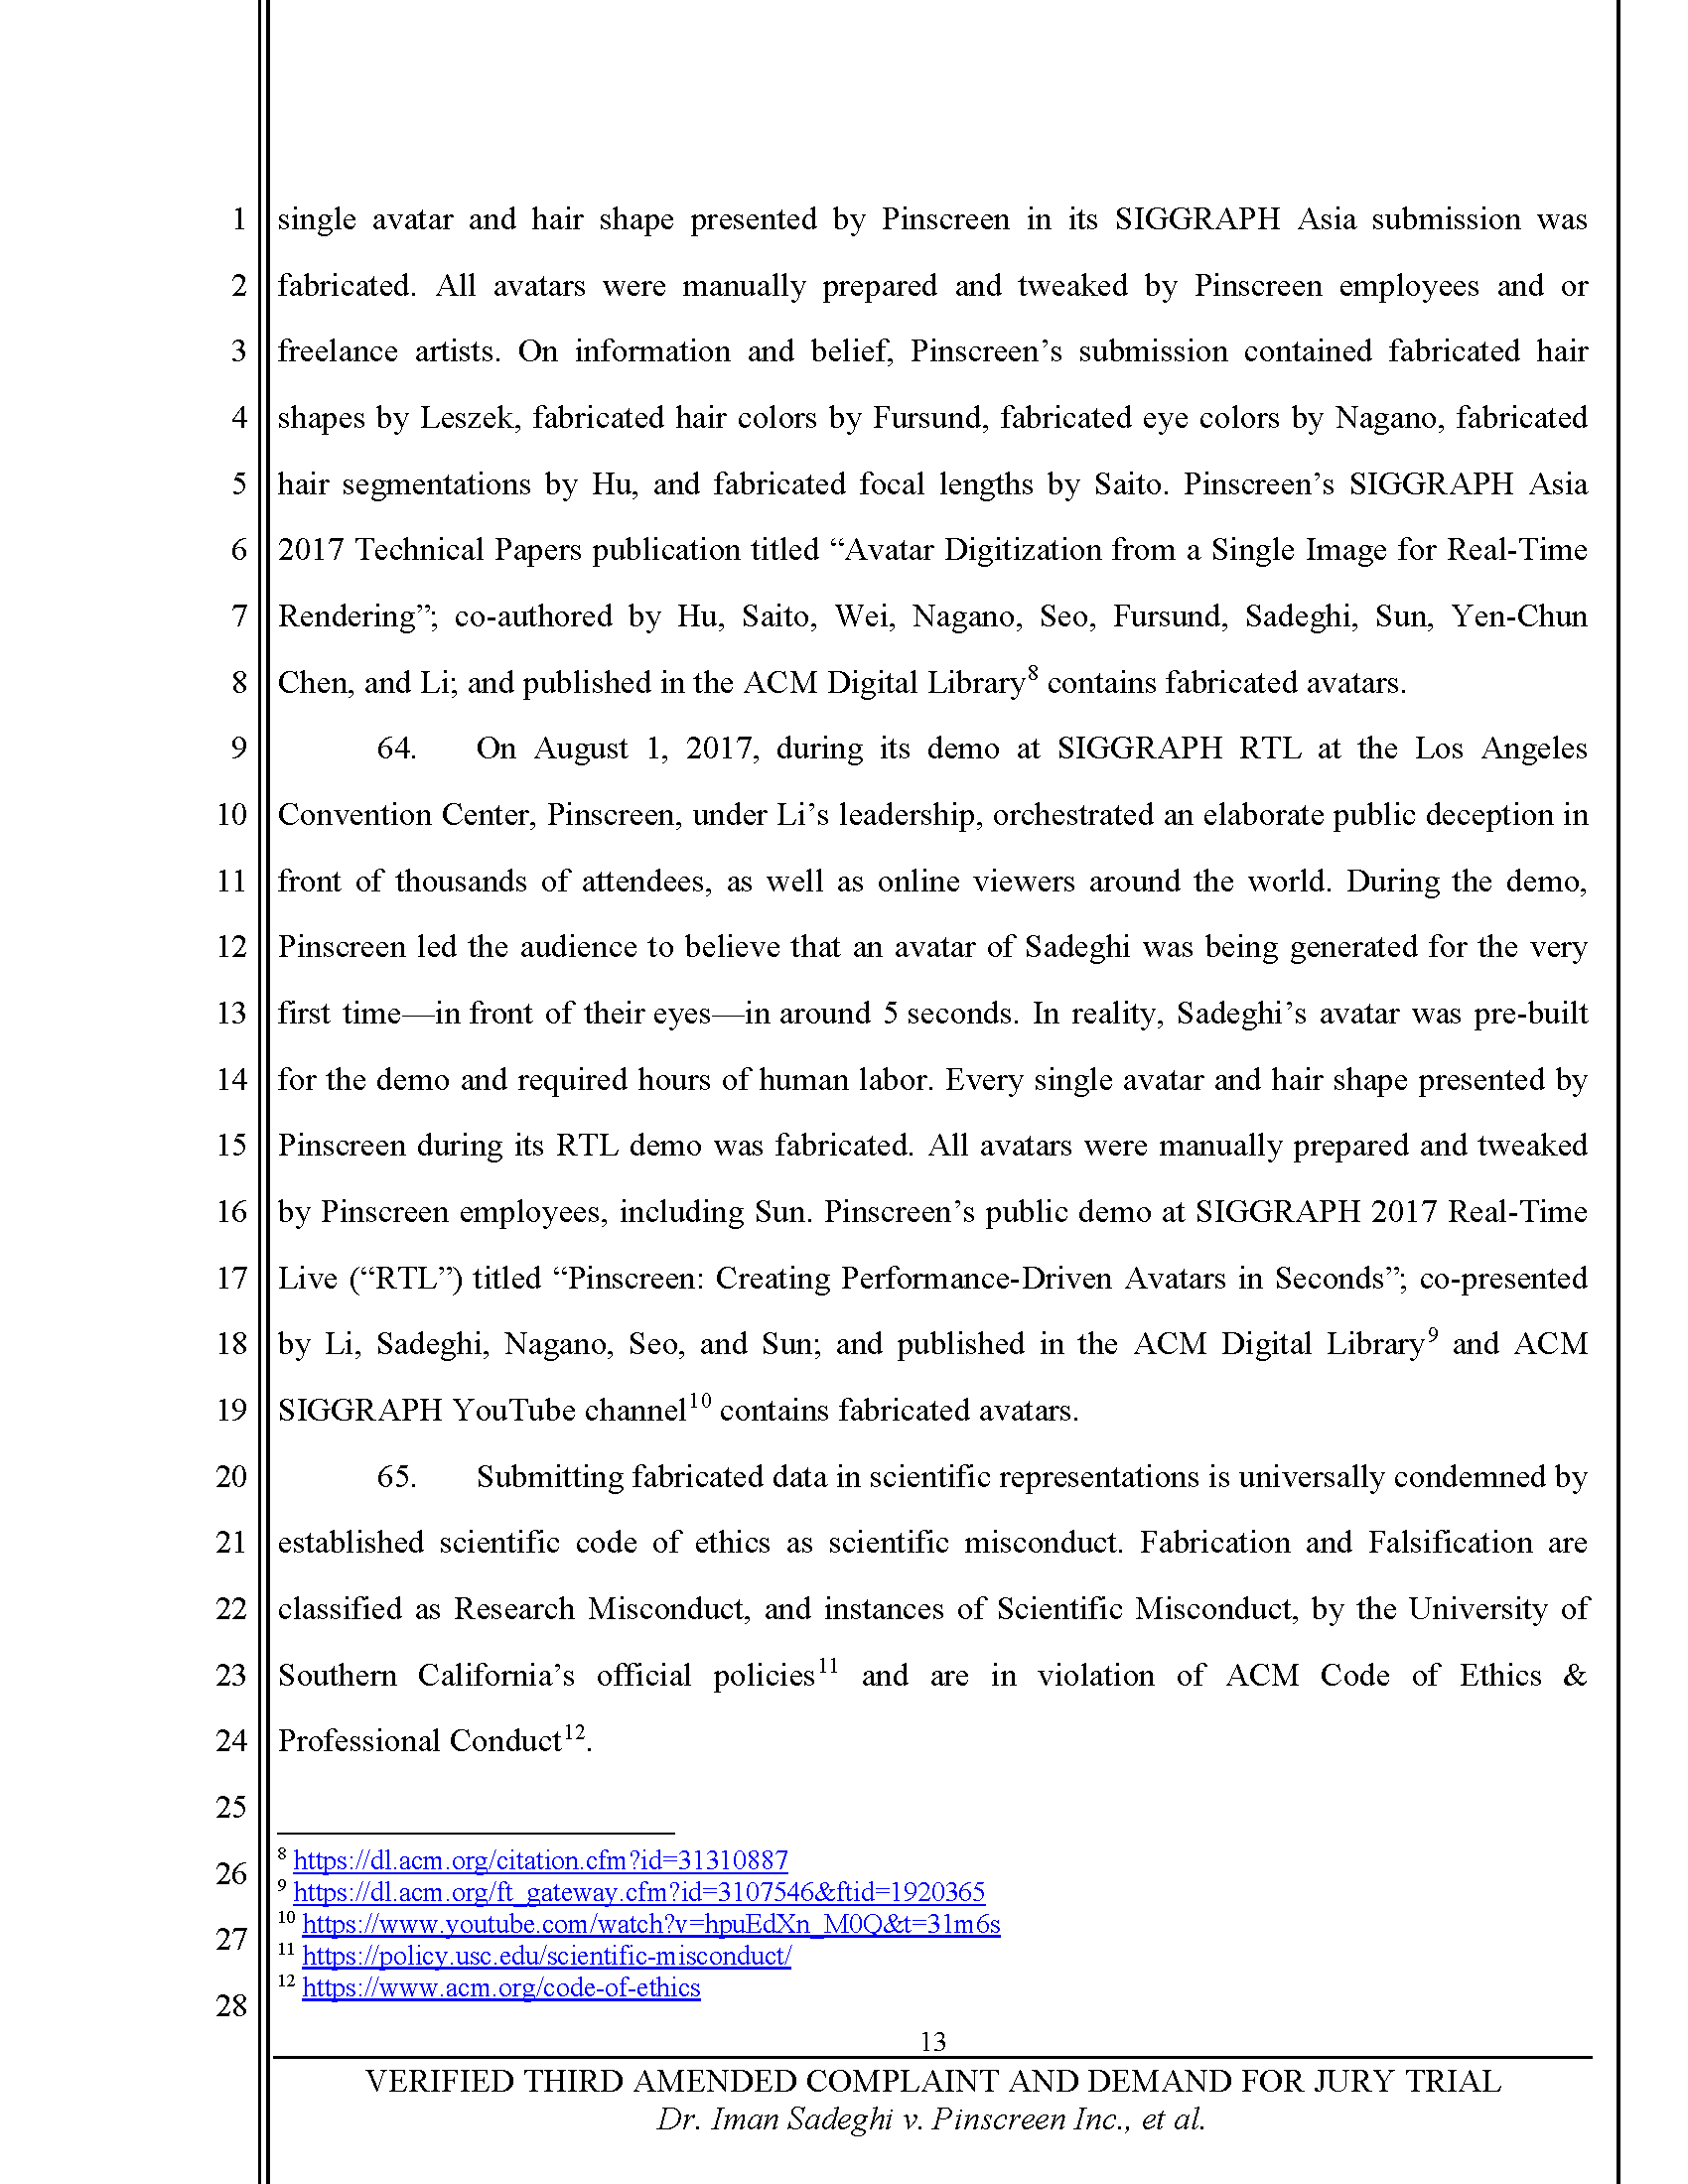 Third Amended Complaint (TAC) Page 14